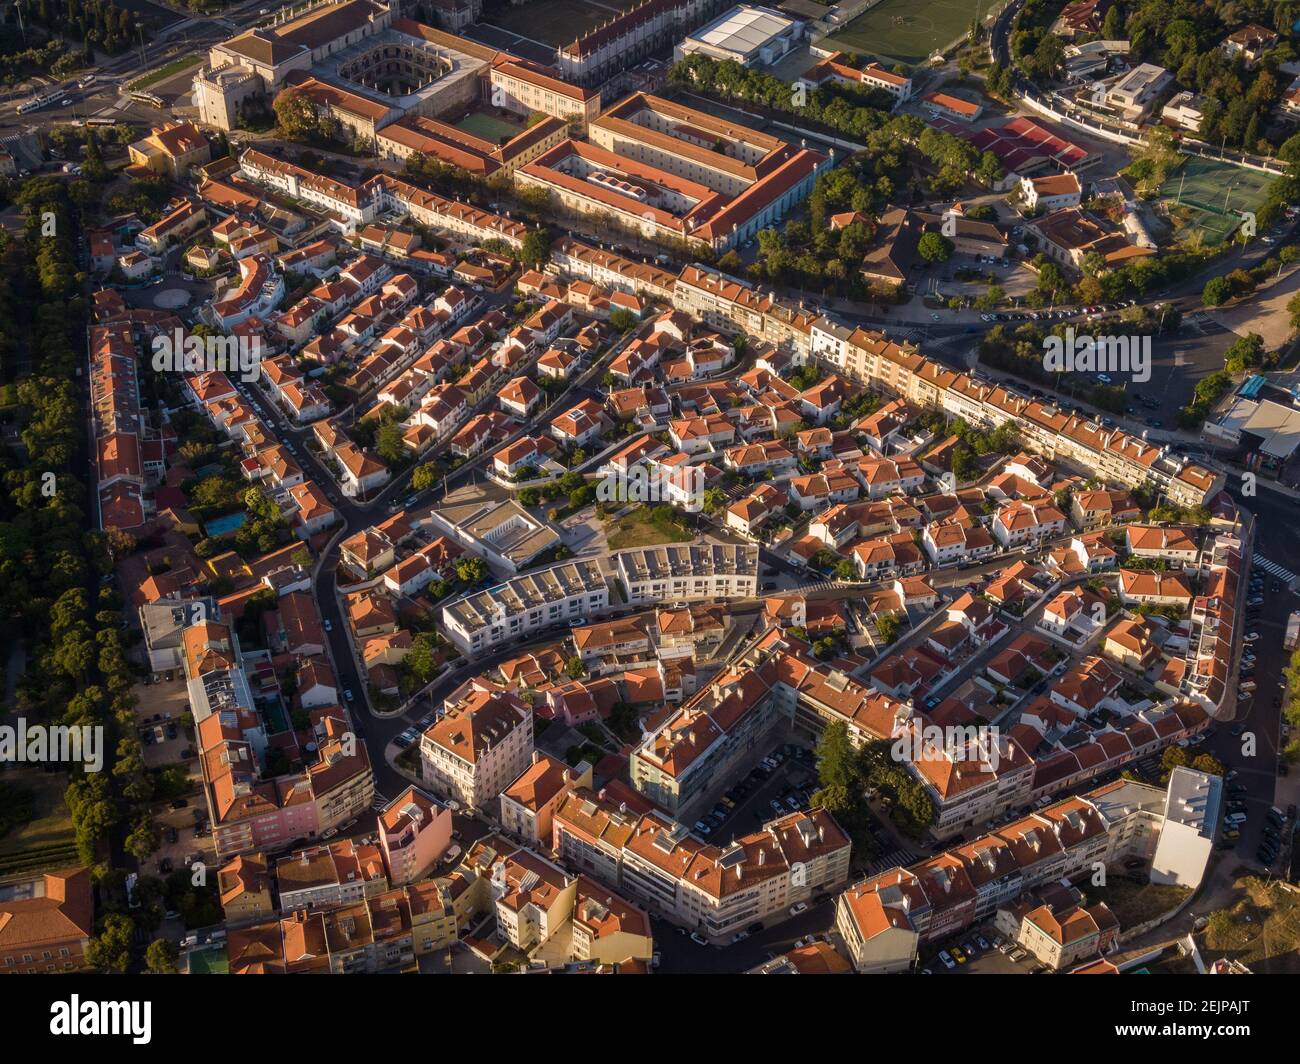 Aerial view of traditional residential neighbourhood at sunrise in the Belem District of Lisbon, Portugal. Stock Photo